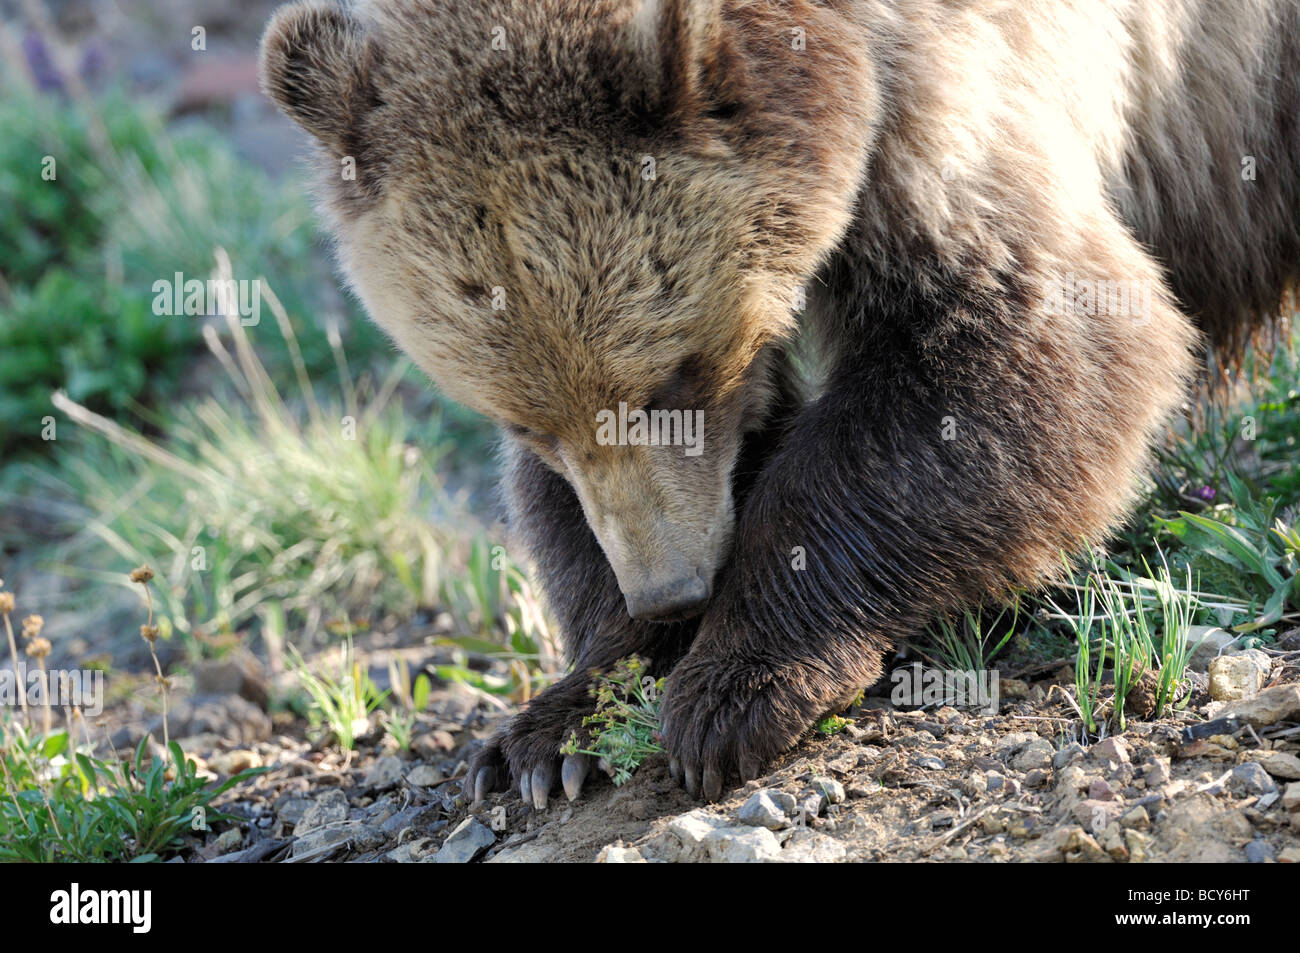 Stock photo of a grizzly bear digging up a plant, Yellowstone National Park, Wyoming, 2009. Stock Photo